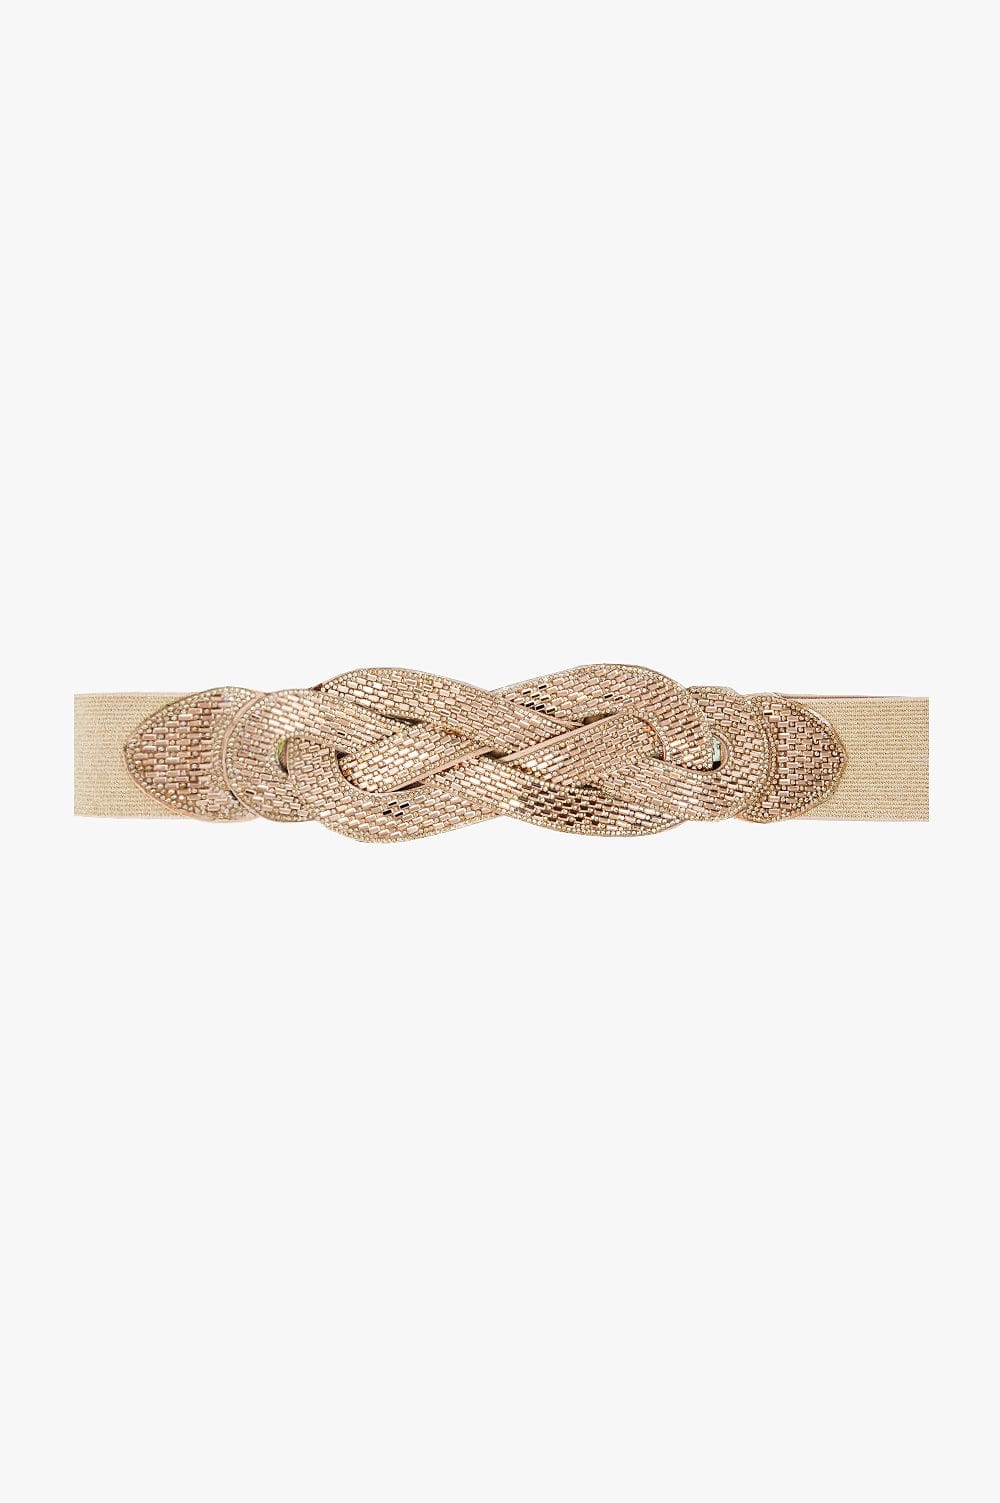 Q2 Women's Belt One Size / Pink Cream Belt With Rose Gold Woven Detail